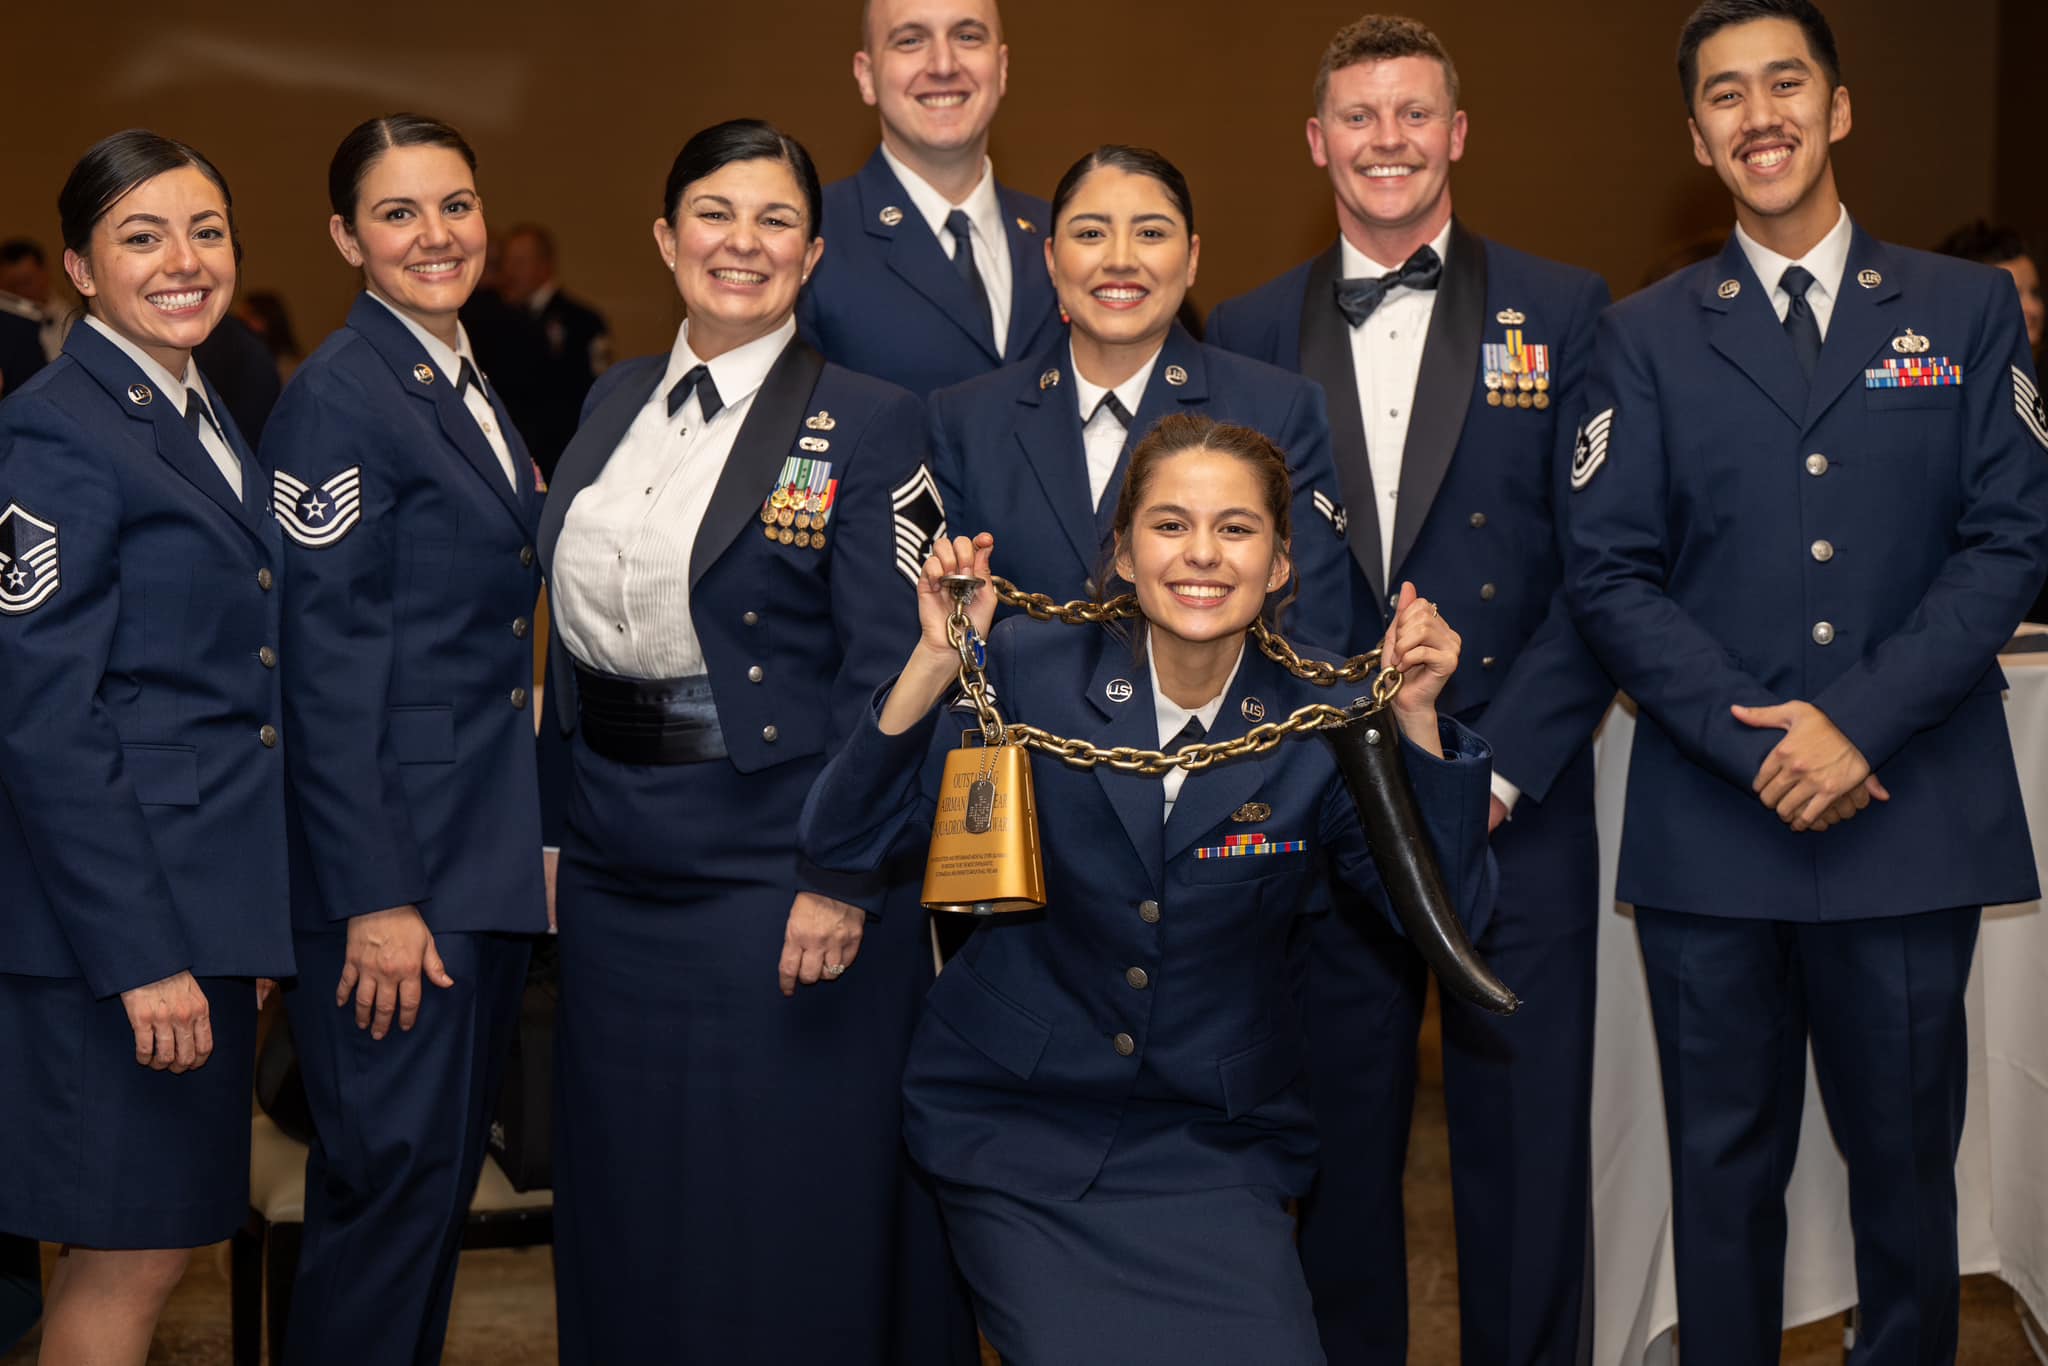 Escarzaga holds a large bell-like award and smiles with seven other airmen in dress uniform.